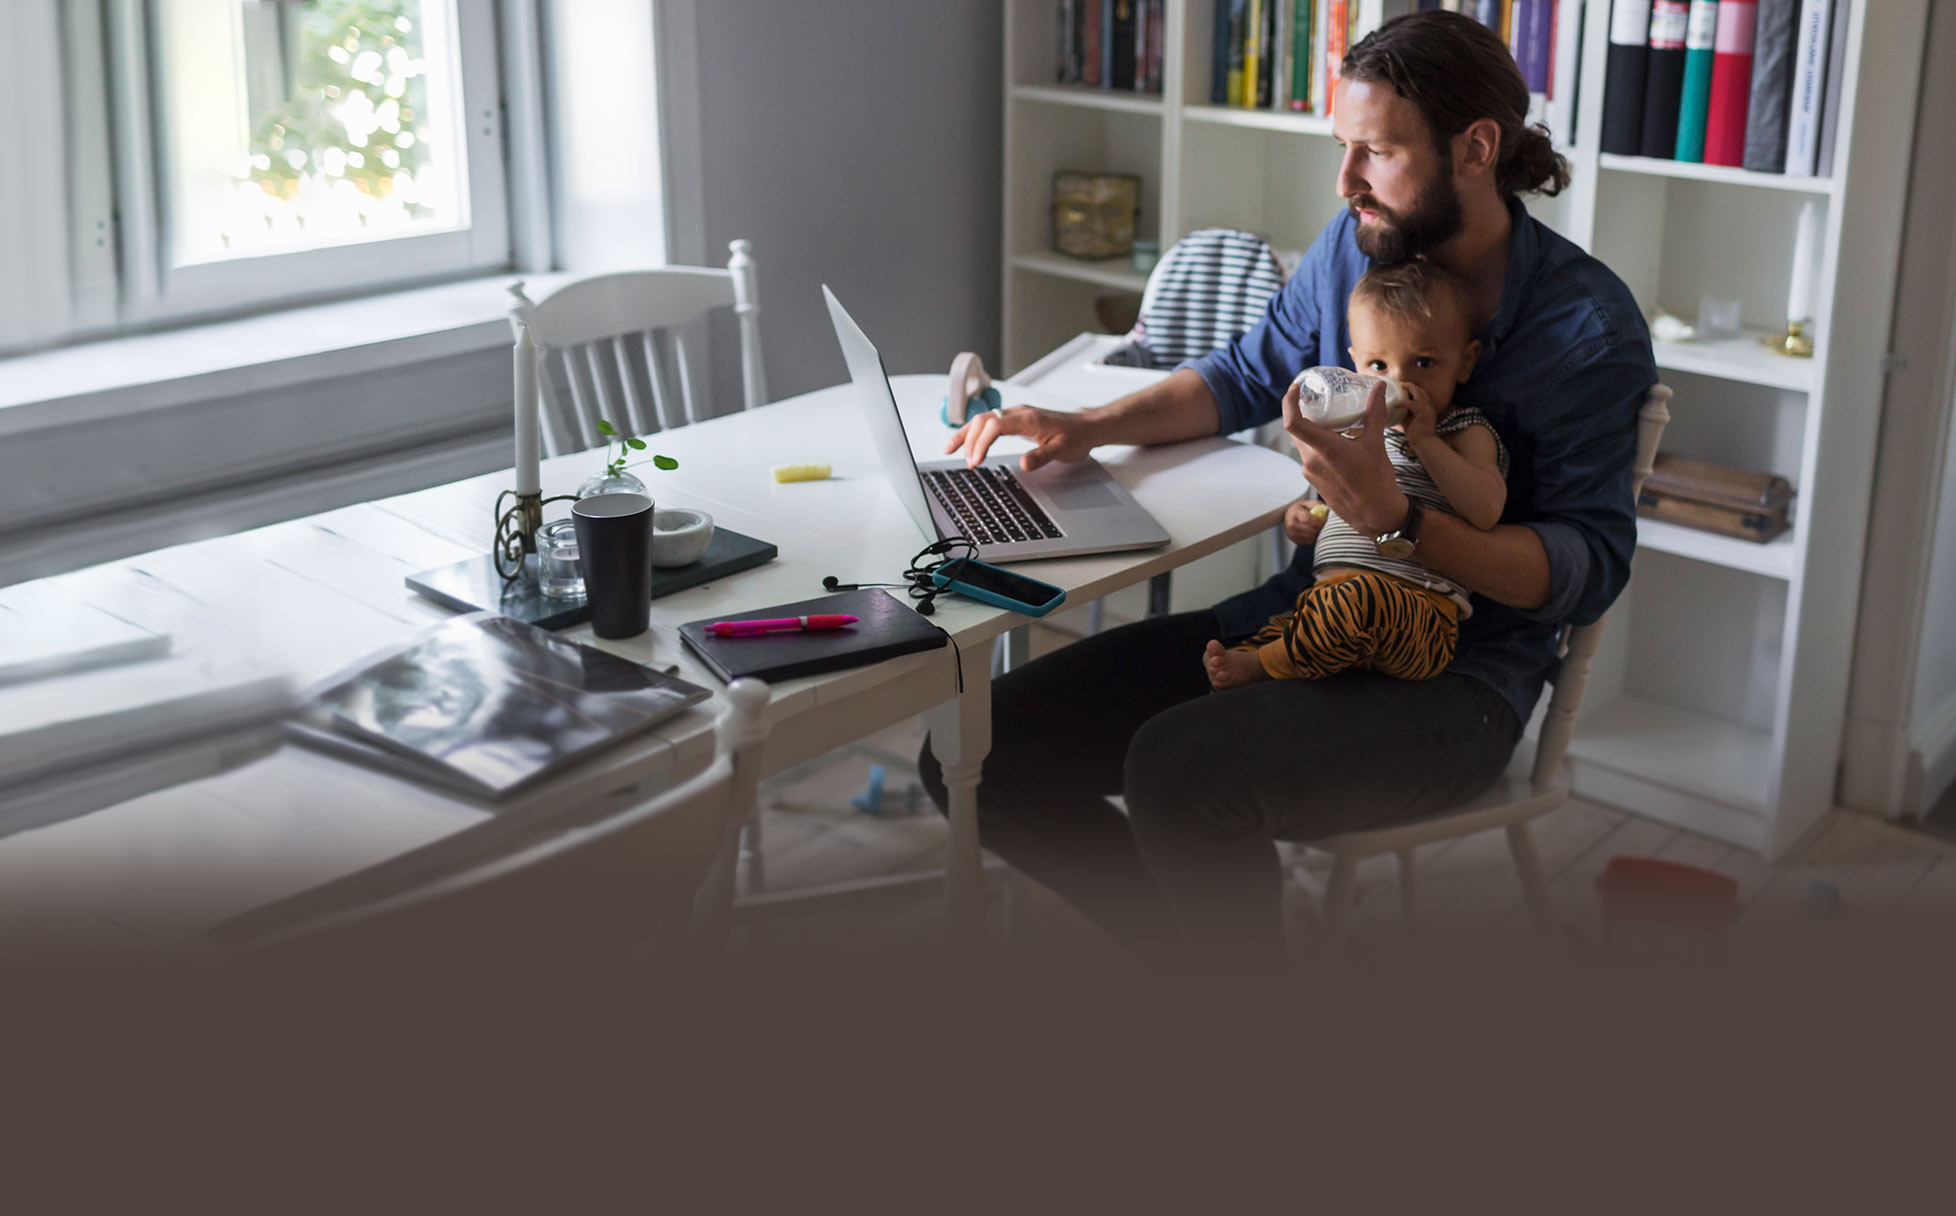 Man working at desk with baby